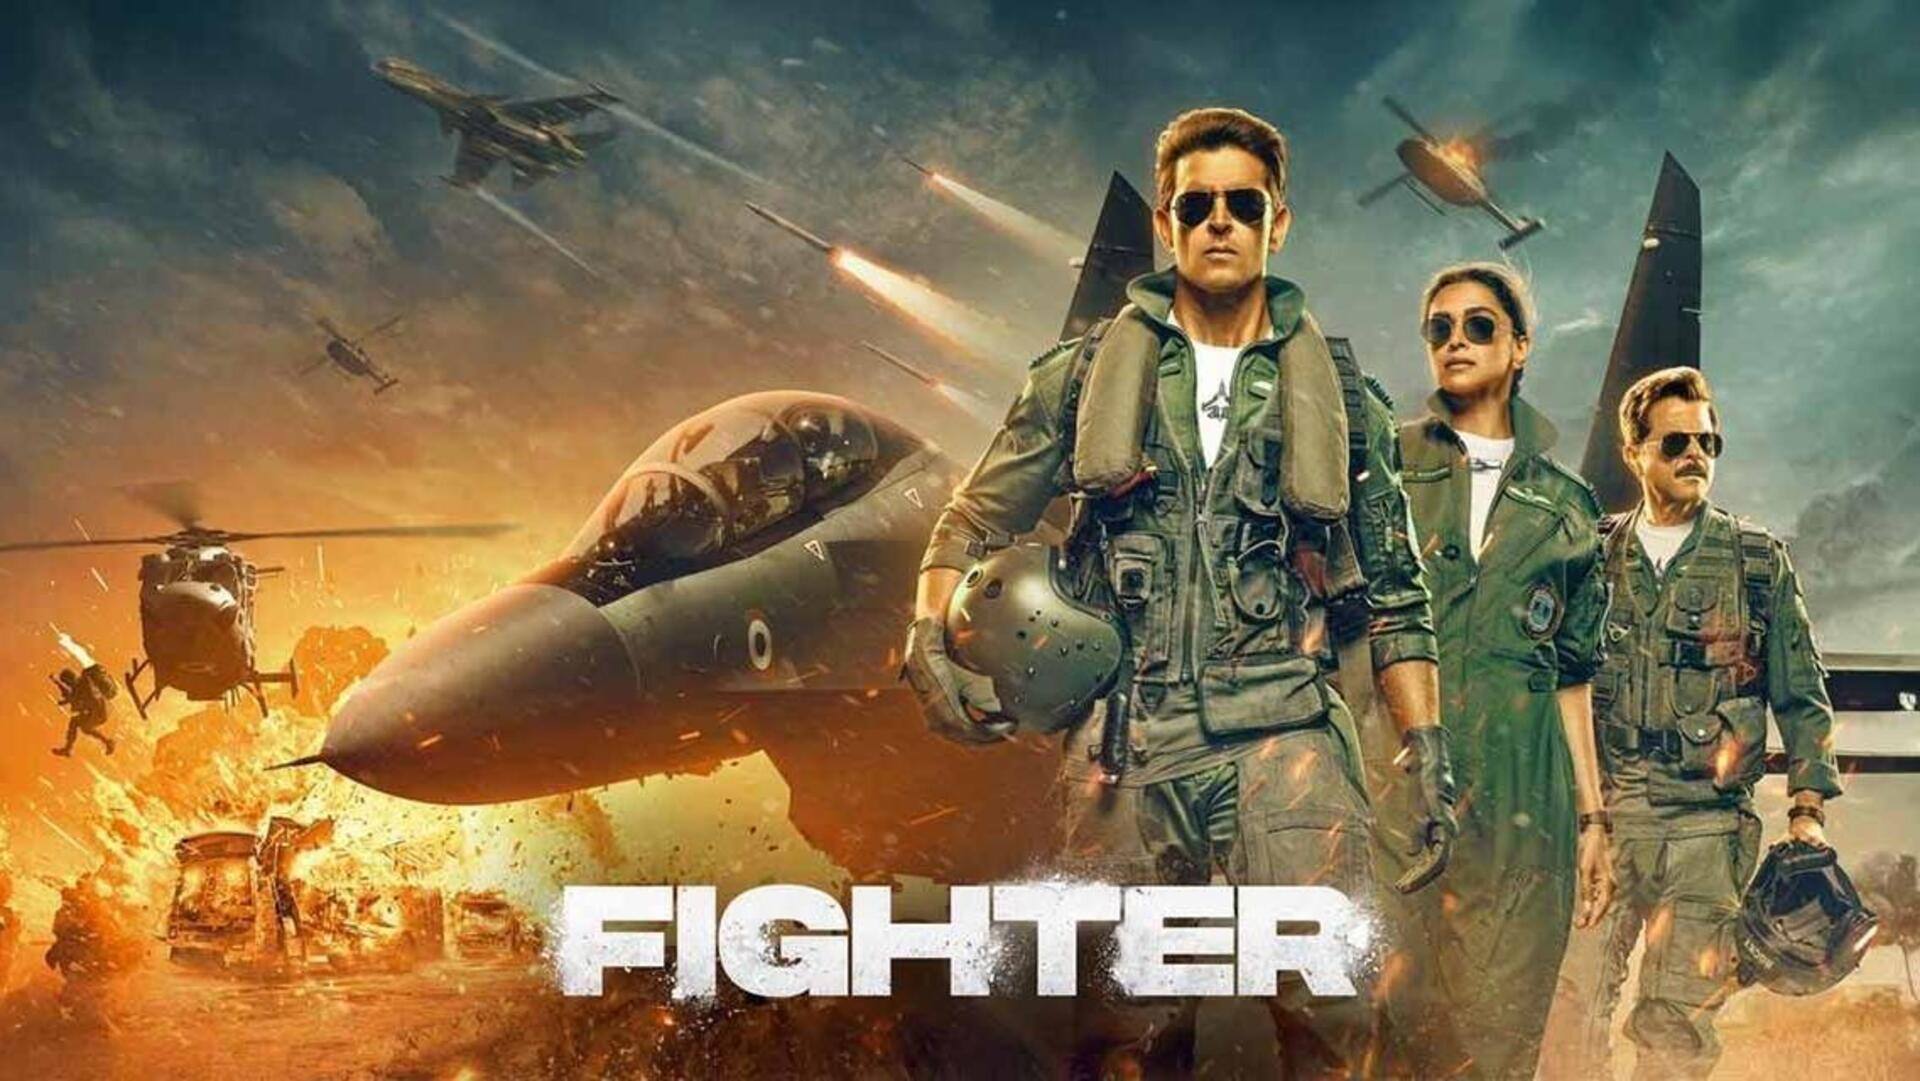 Box office collection: 'Fighter' witnesses drop after 4th weekend